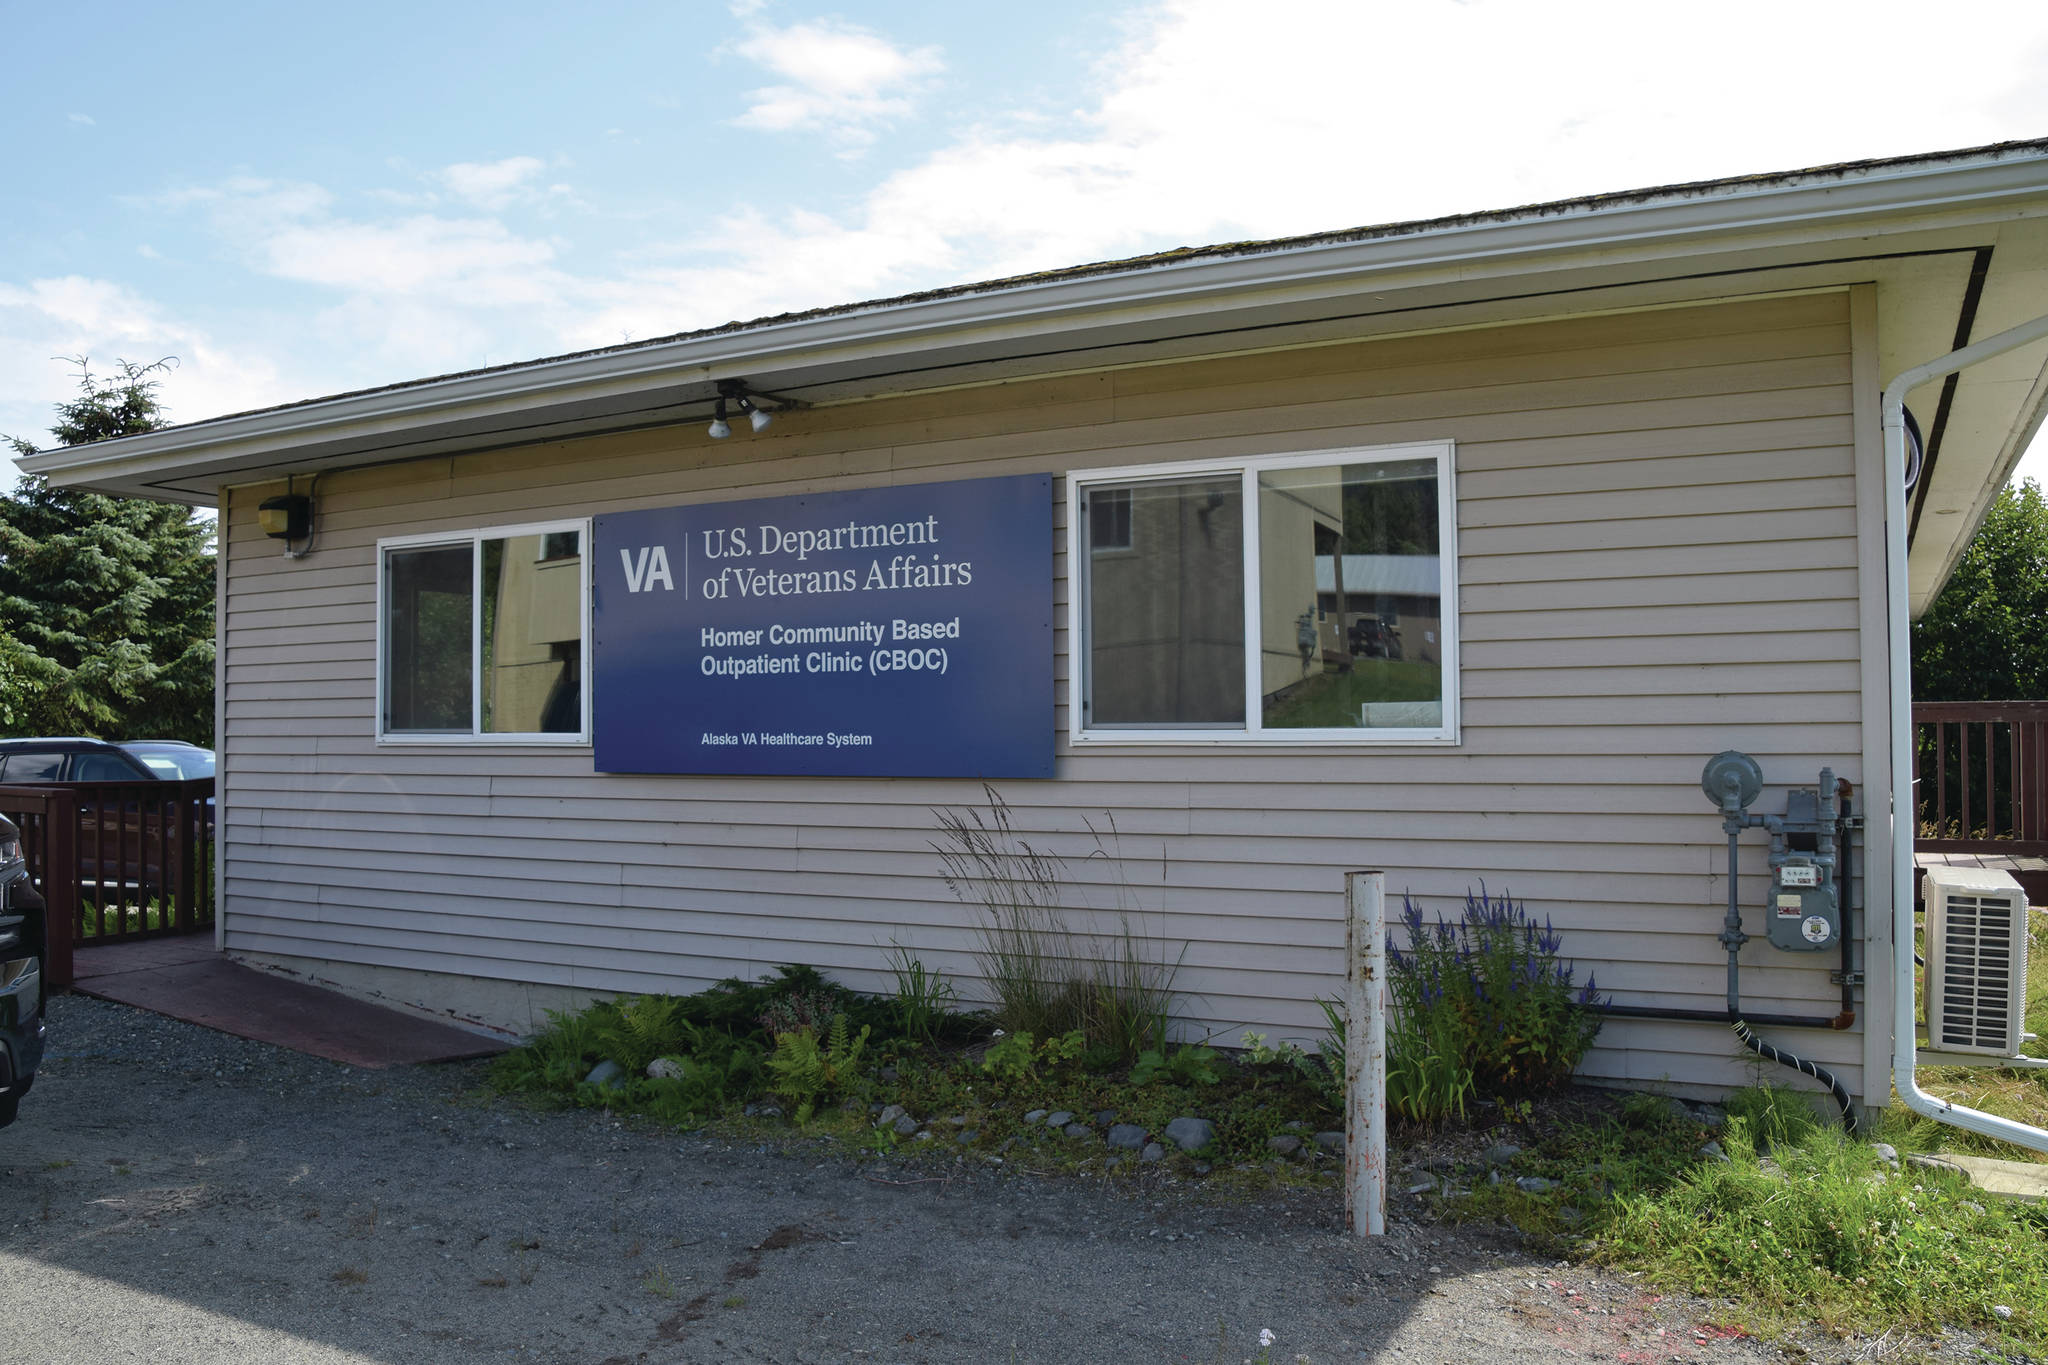 The new U.S. Department of Veterans Affairs Homer Community Based Outpatient Clinic as seen on Aug. 11, 2020, in Homer, Alaska. The clinic opened for patients on Tuesday, Sept. 29, 2020. (Photo courtesy of U.S. Department of Veterans Affairs)